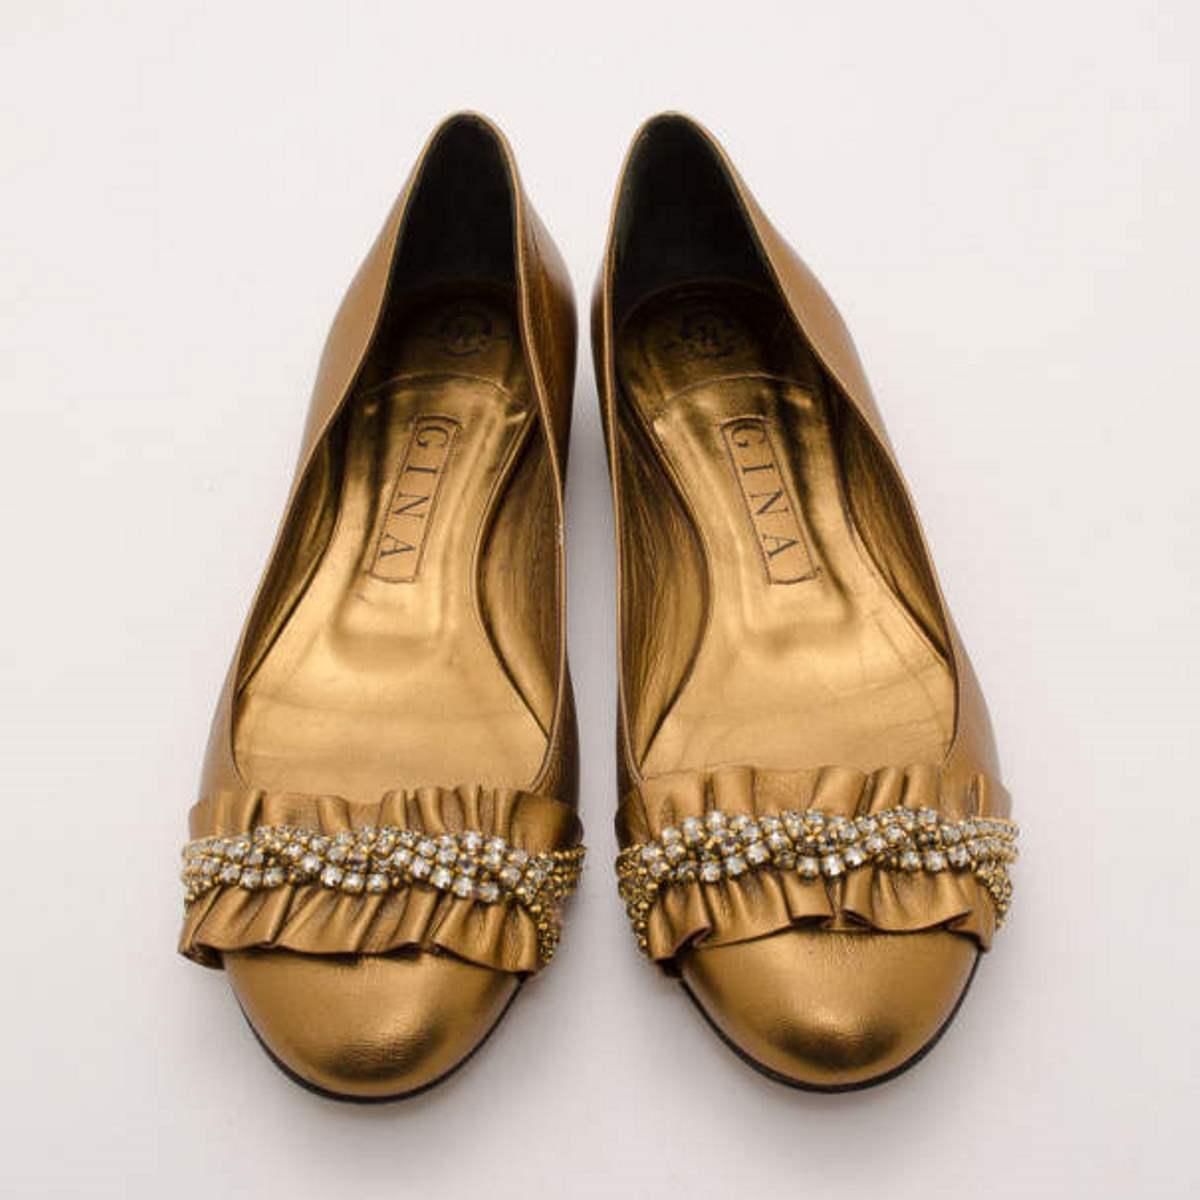 Dress up your look with these dazzling metallic embellished ballerina flats from Gina. These size 37 flats are made from metallic bronze leather with ruched leather and sparkling crystal detailed rounded toes. The insoles are lined with leather and